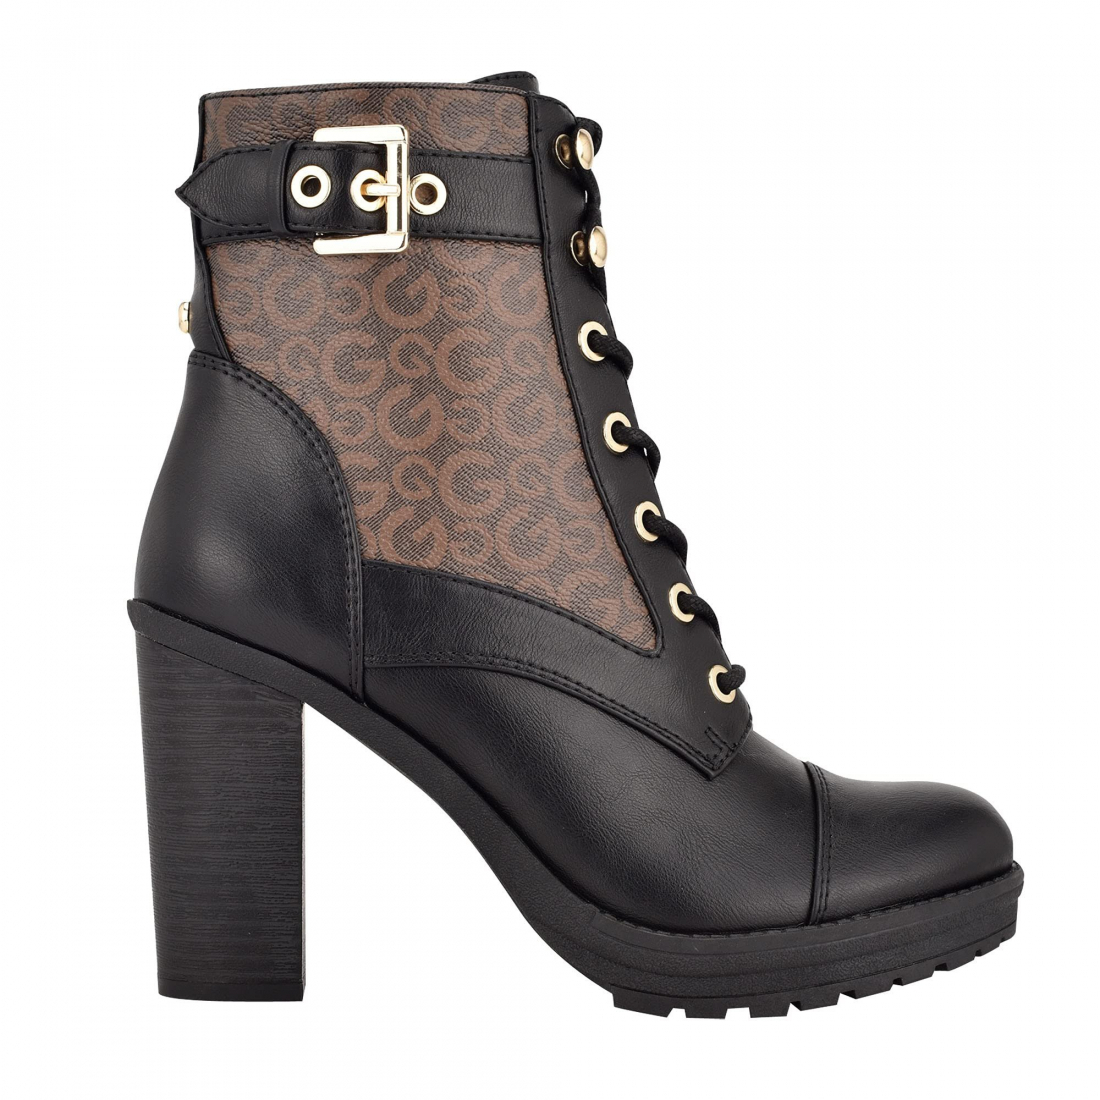 Women's 'Gifty' High Heeled Boots